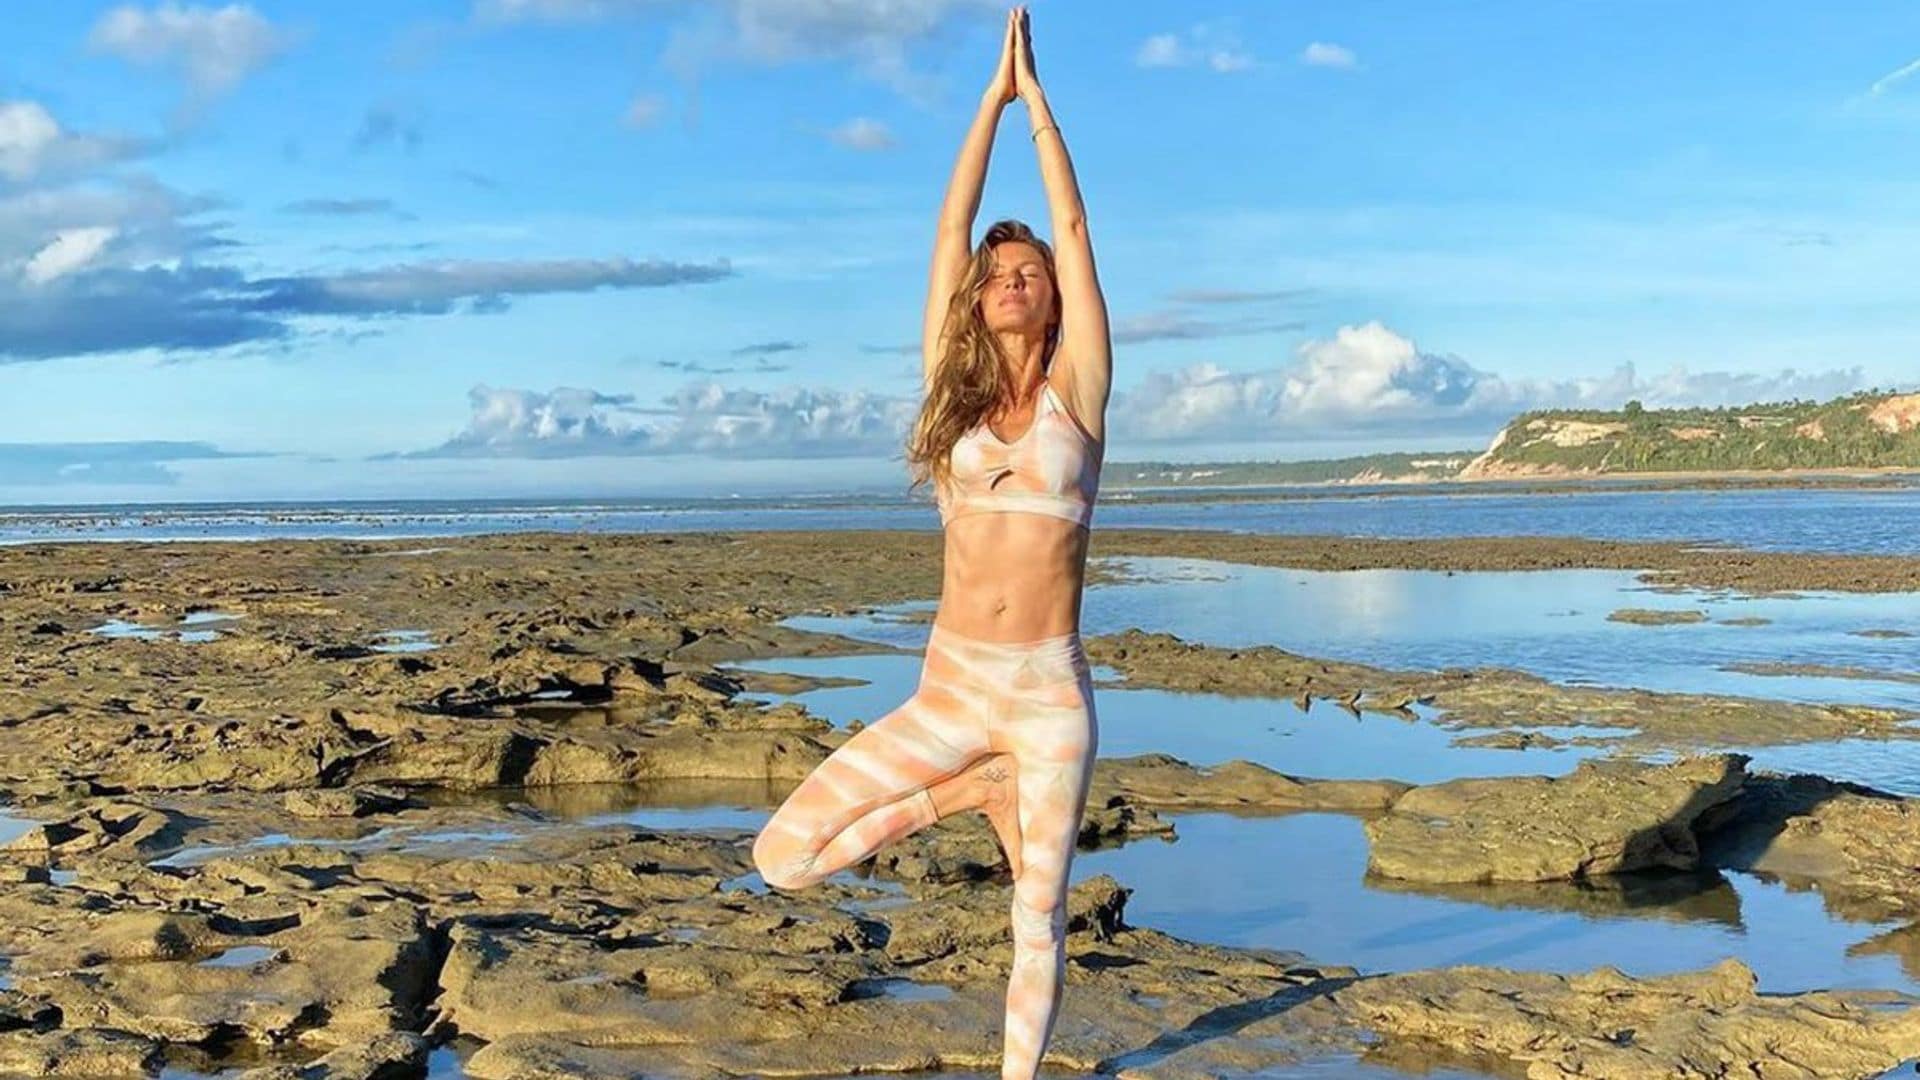 Gisele Bündchen reflects on the “most difficult times” in her life on international Yoga Day